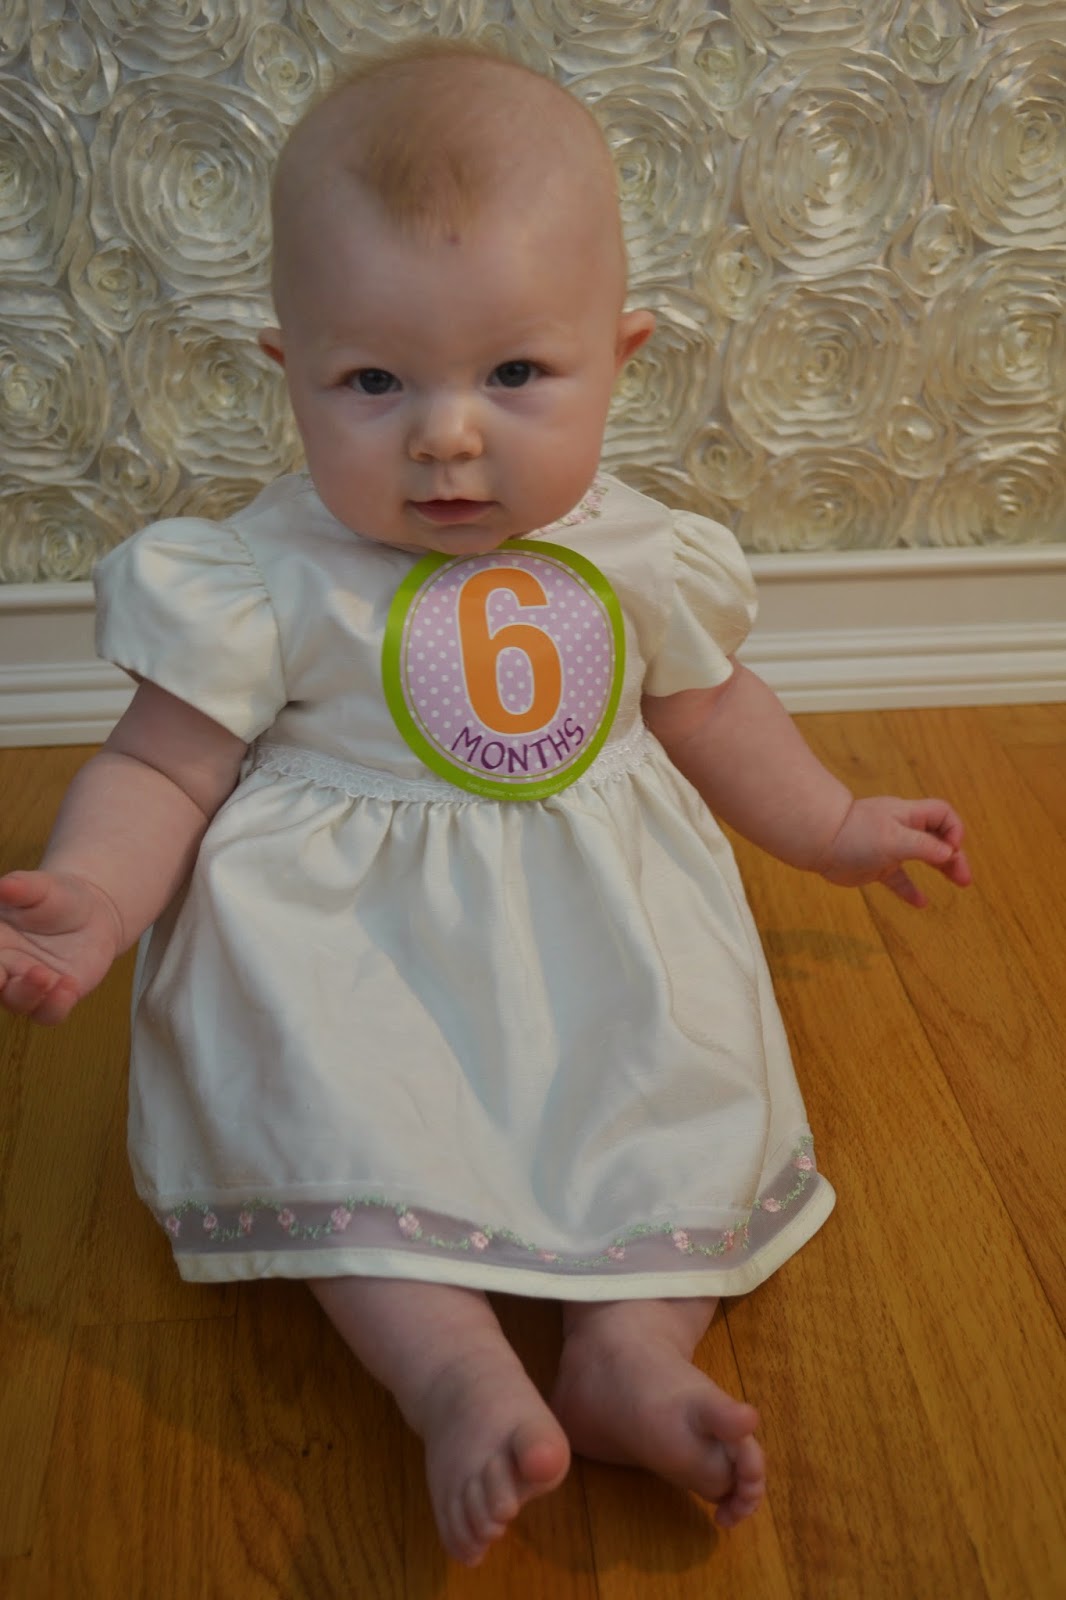 Half way to her first birthday already - happy 6 months baby girl